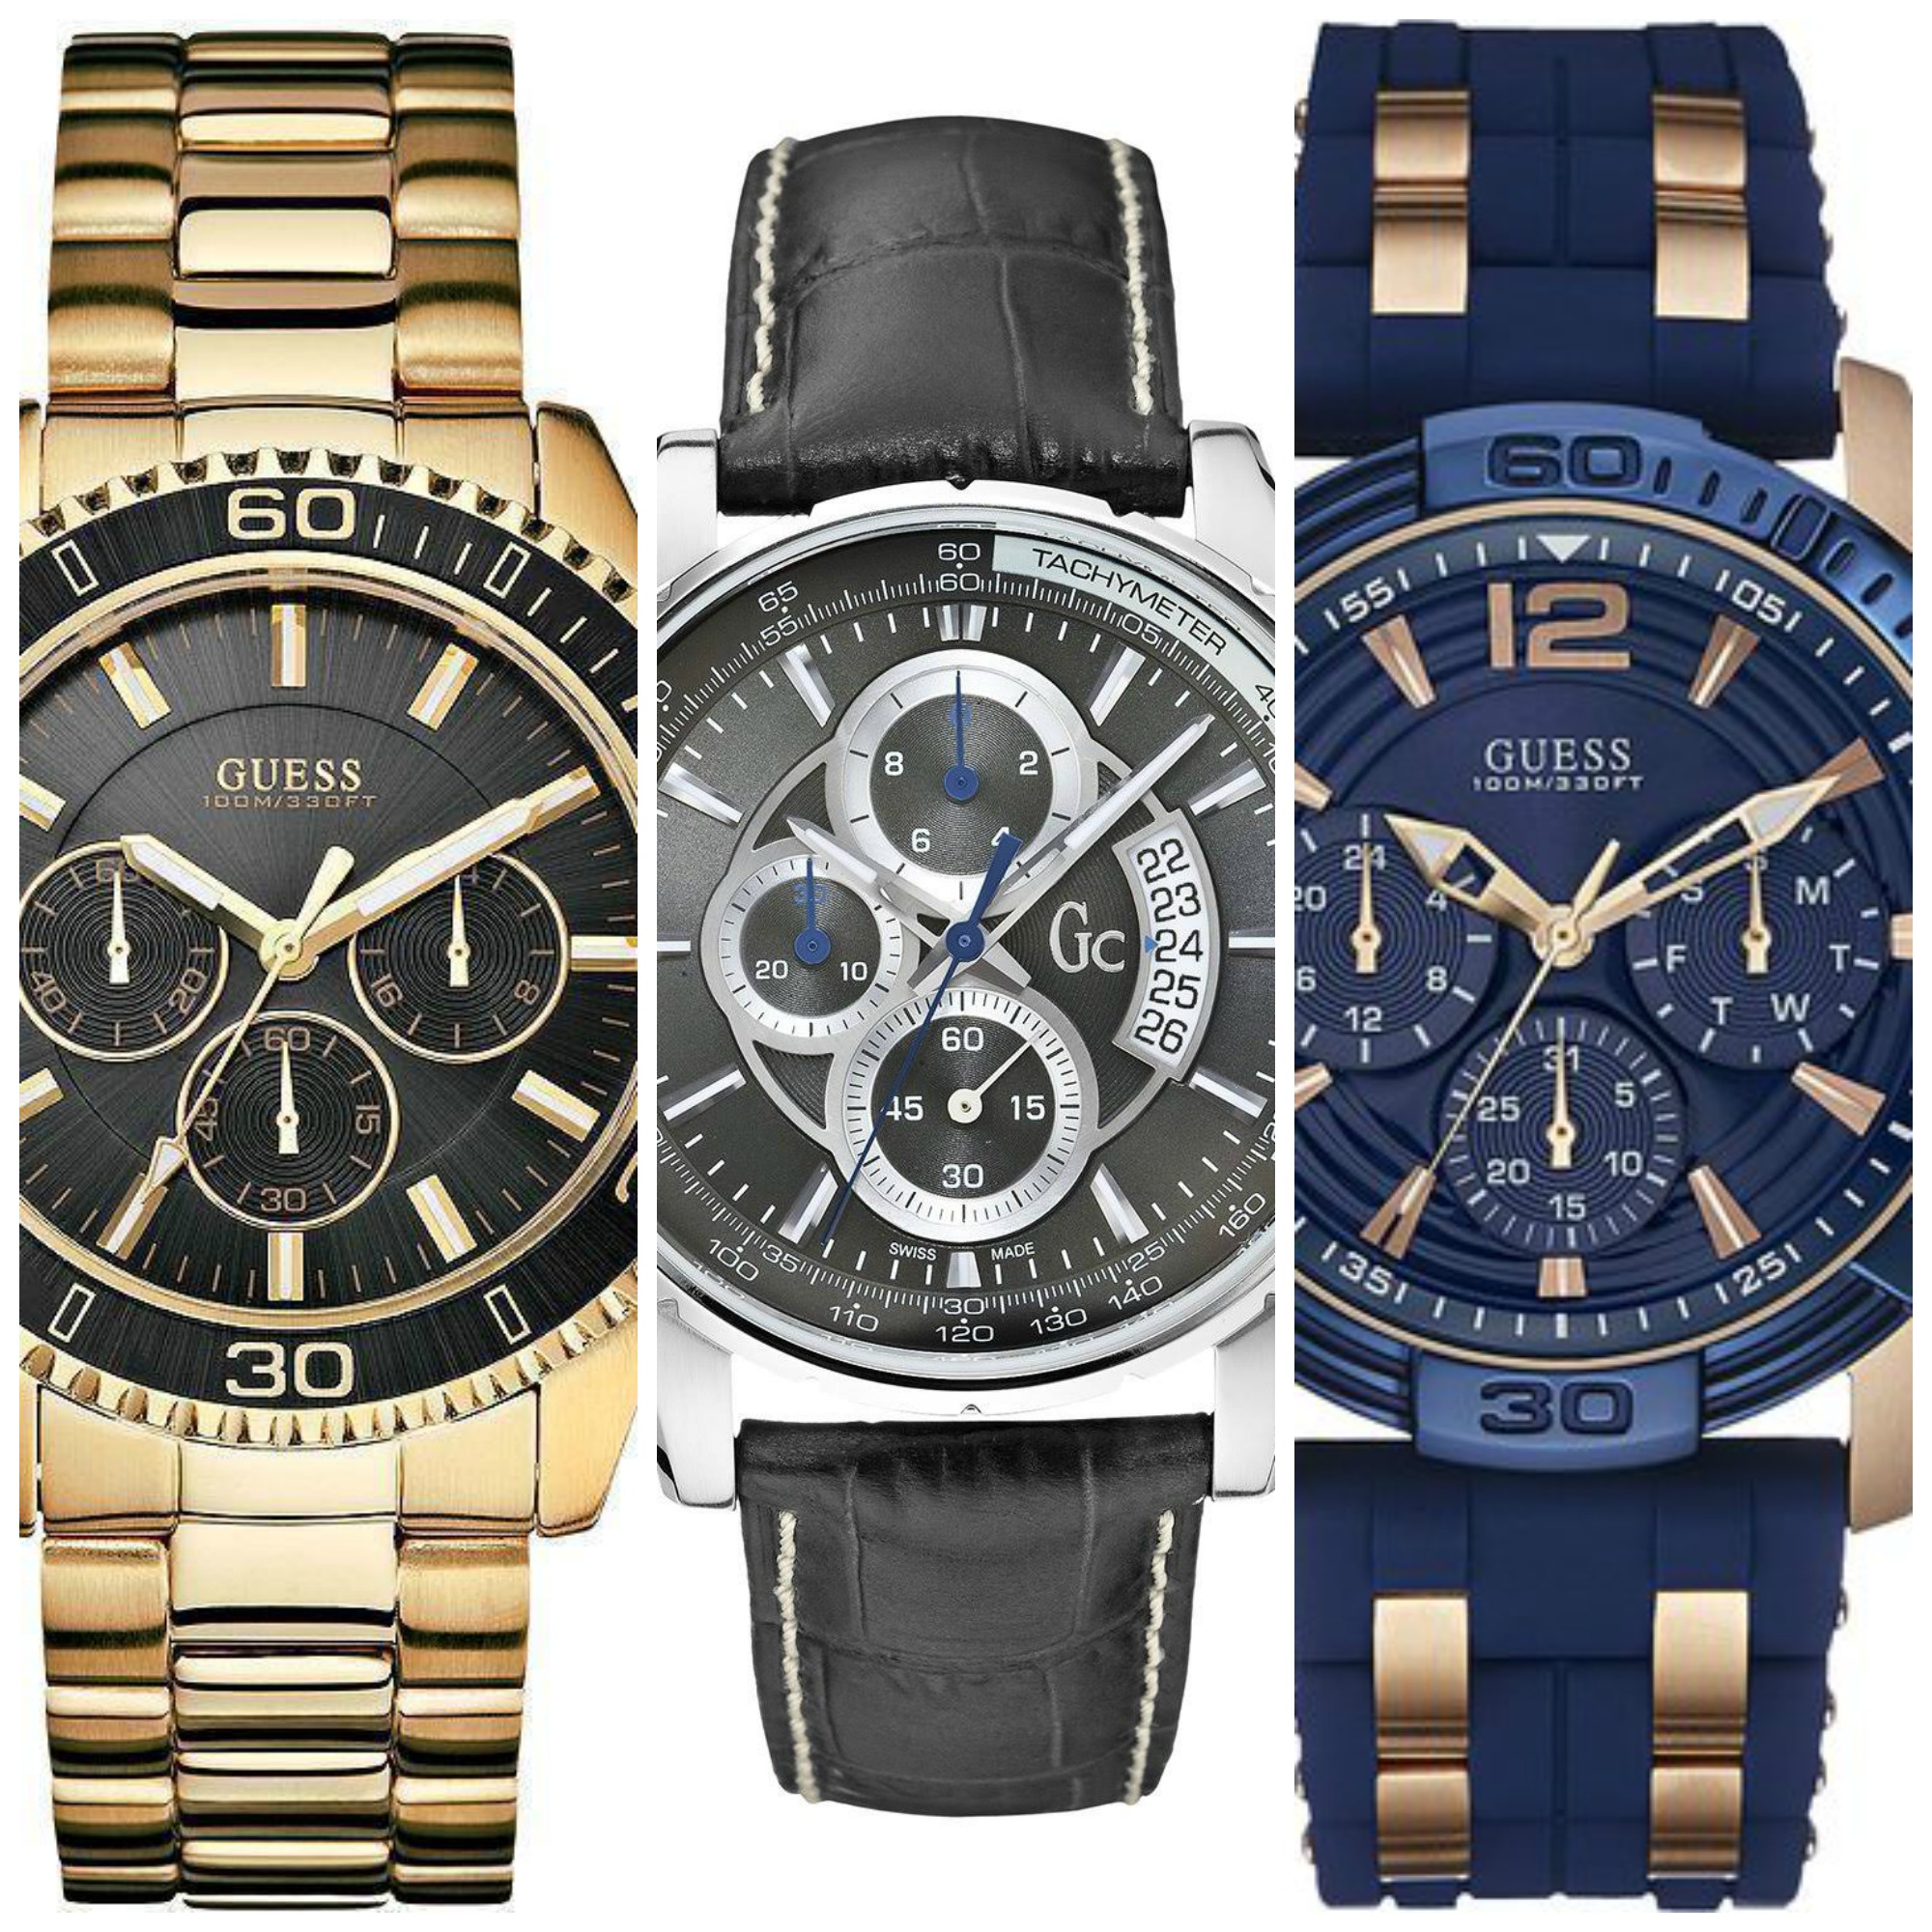 GUESS Mens Gold Tone Multi-function Watch - GW0261G2 | GUESS Watches US-hkpdtq2012.edu.vn